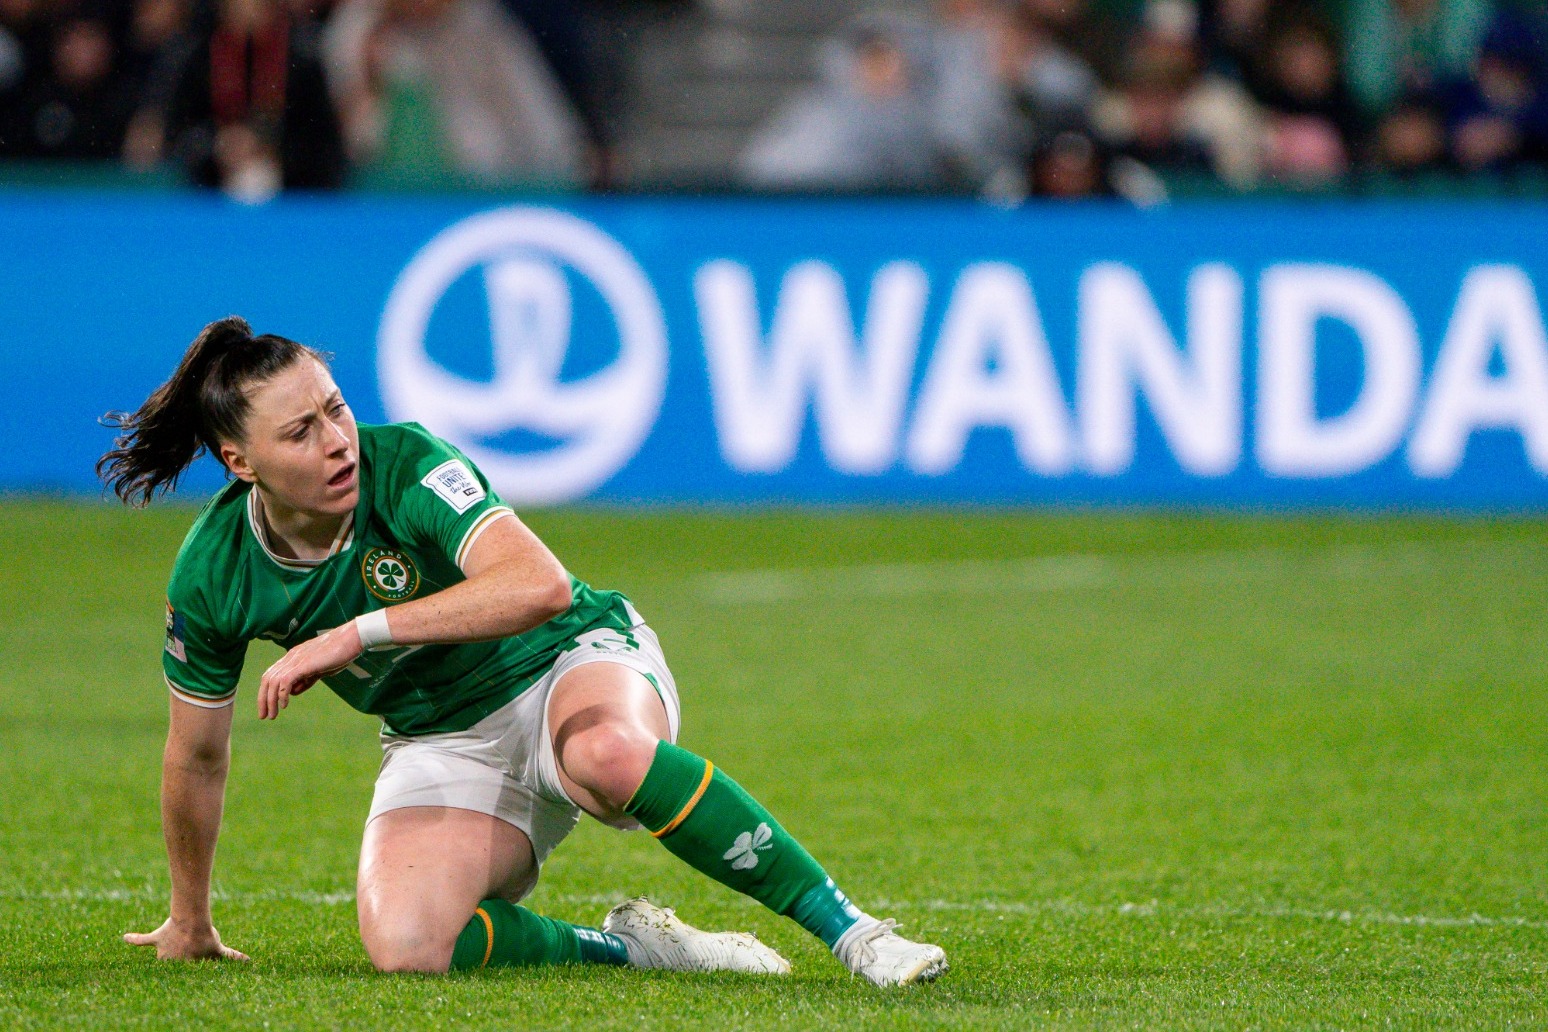 Defeat ends Republic of Ireland hopes of extending debut World Cup campaign 